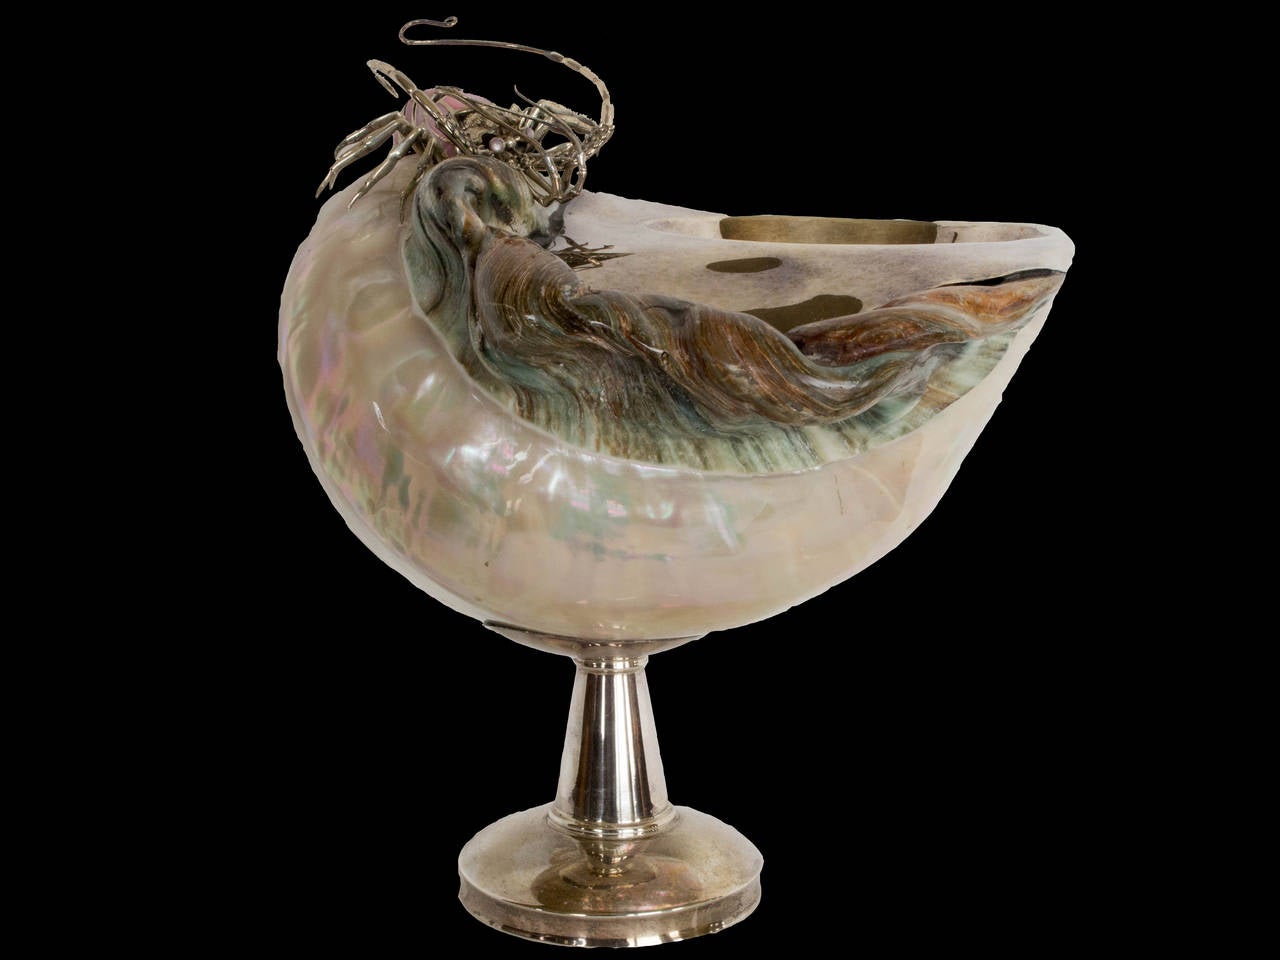 An absolutely gorgeous and magnificent realized shell and sterling silver caviar bowl or dish. Set on a sterling silver pedestal foot, the bowl formed by a large, pearlized natural spiral seashell fitted with a sterling silver lining. 
The shell